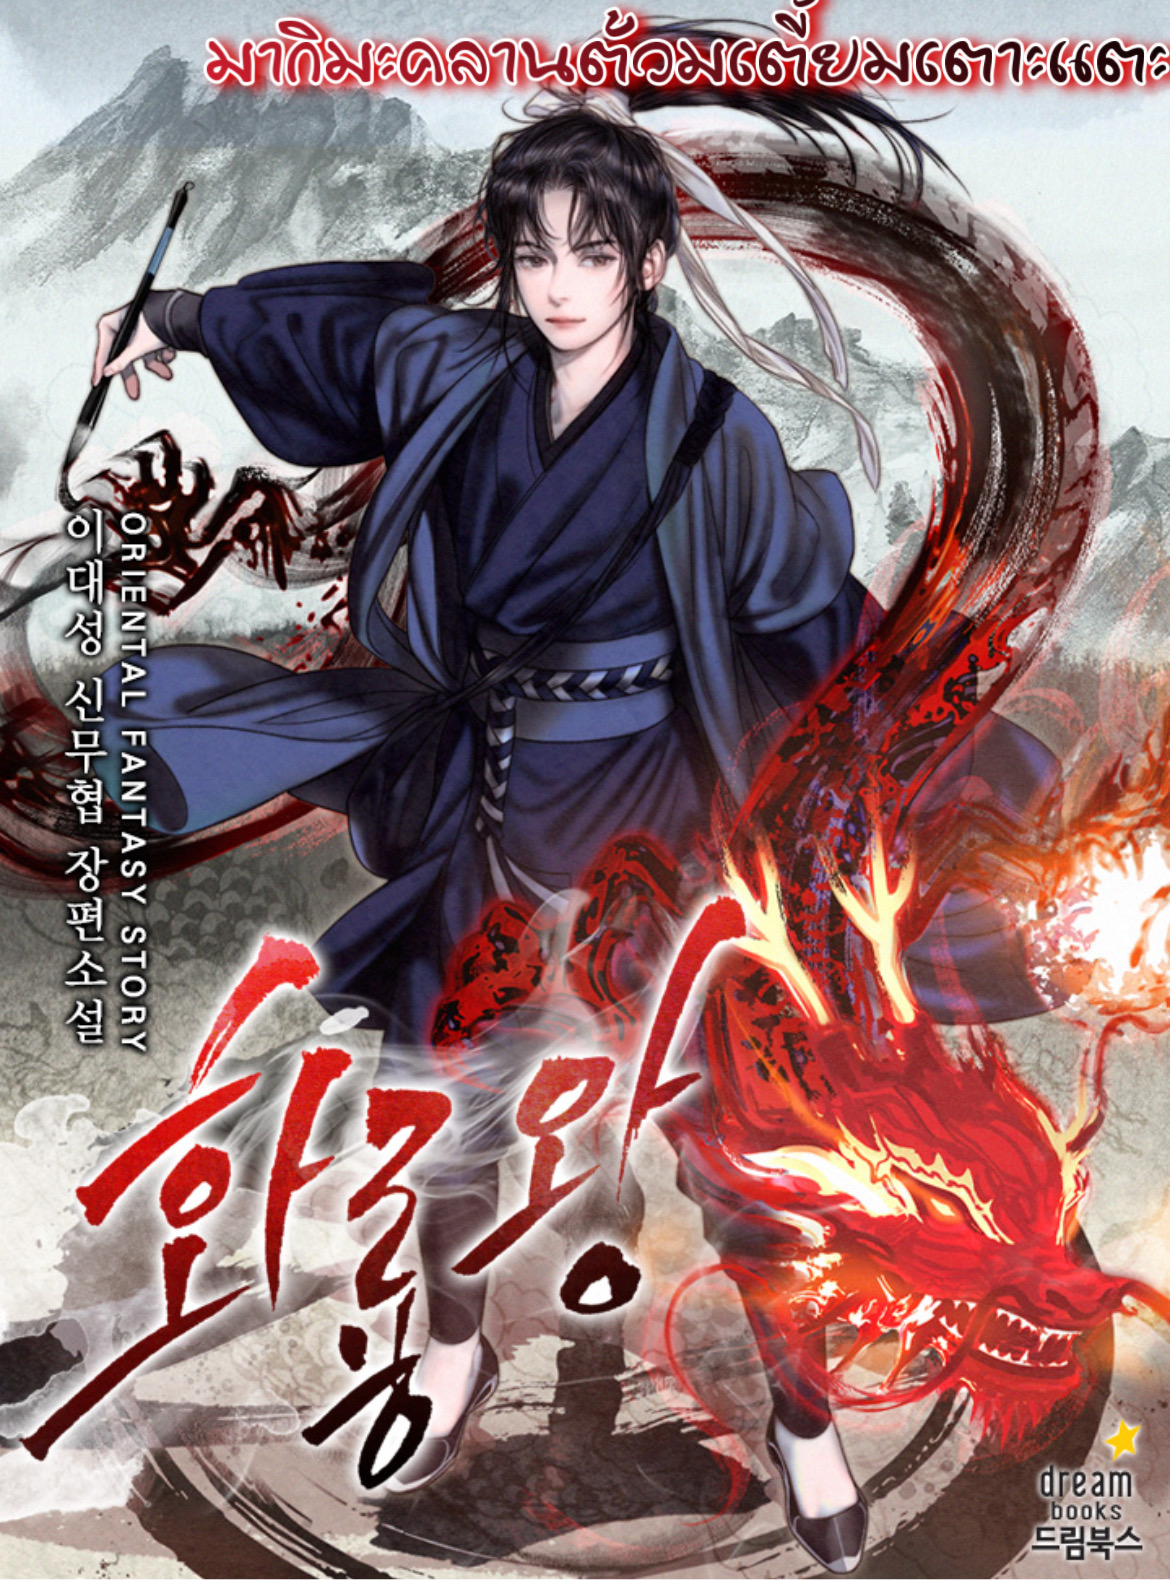 King of Fire Dragon 28 8